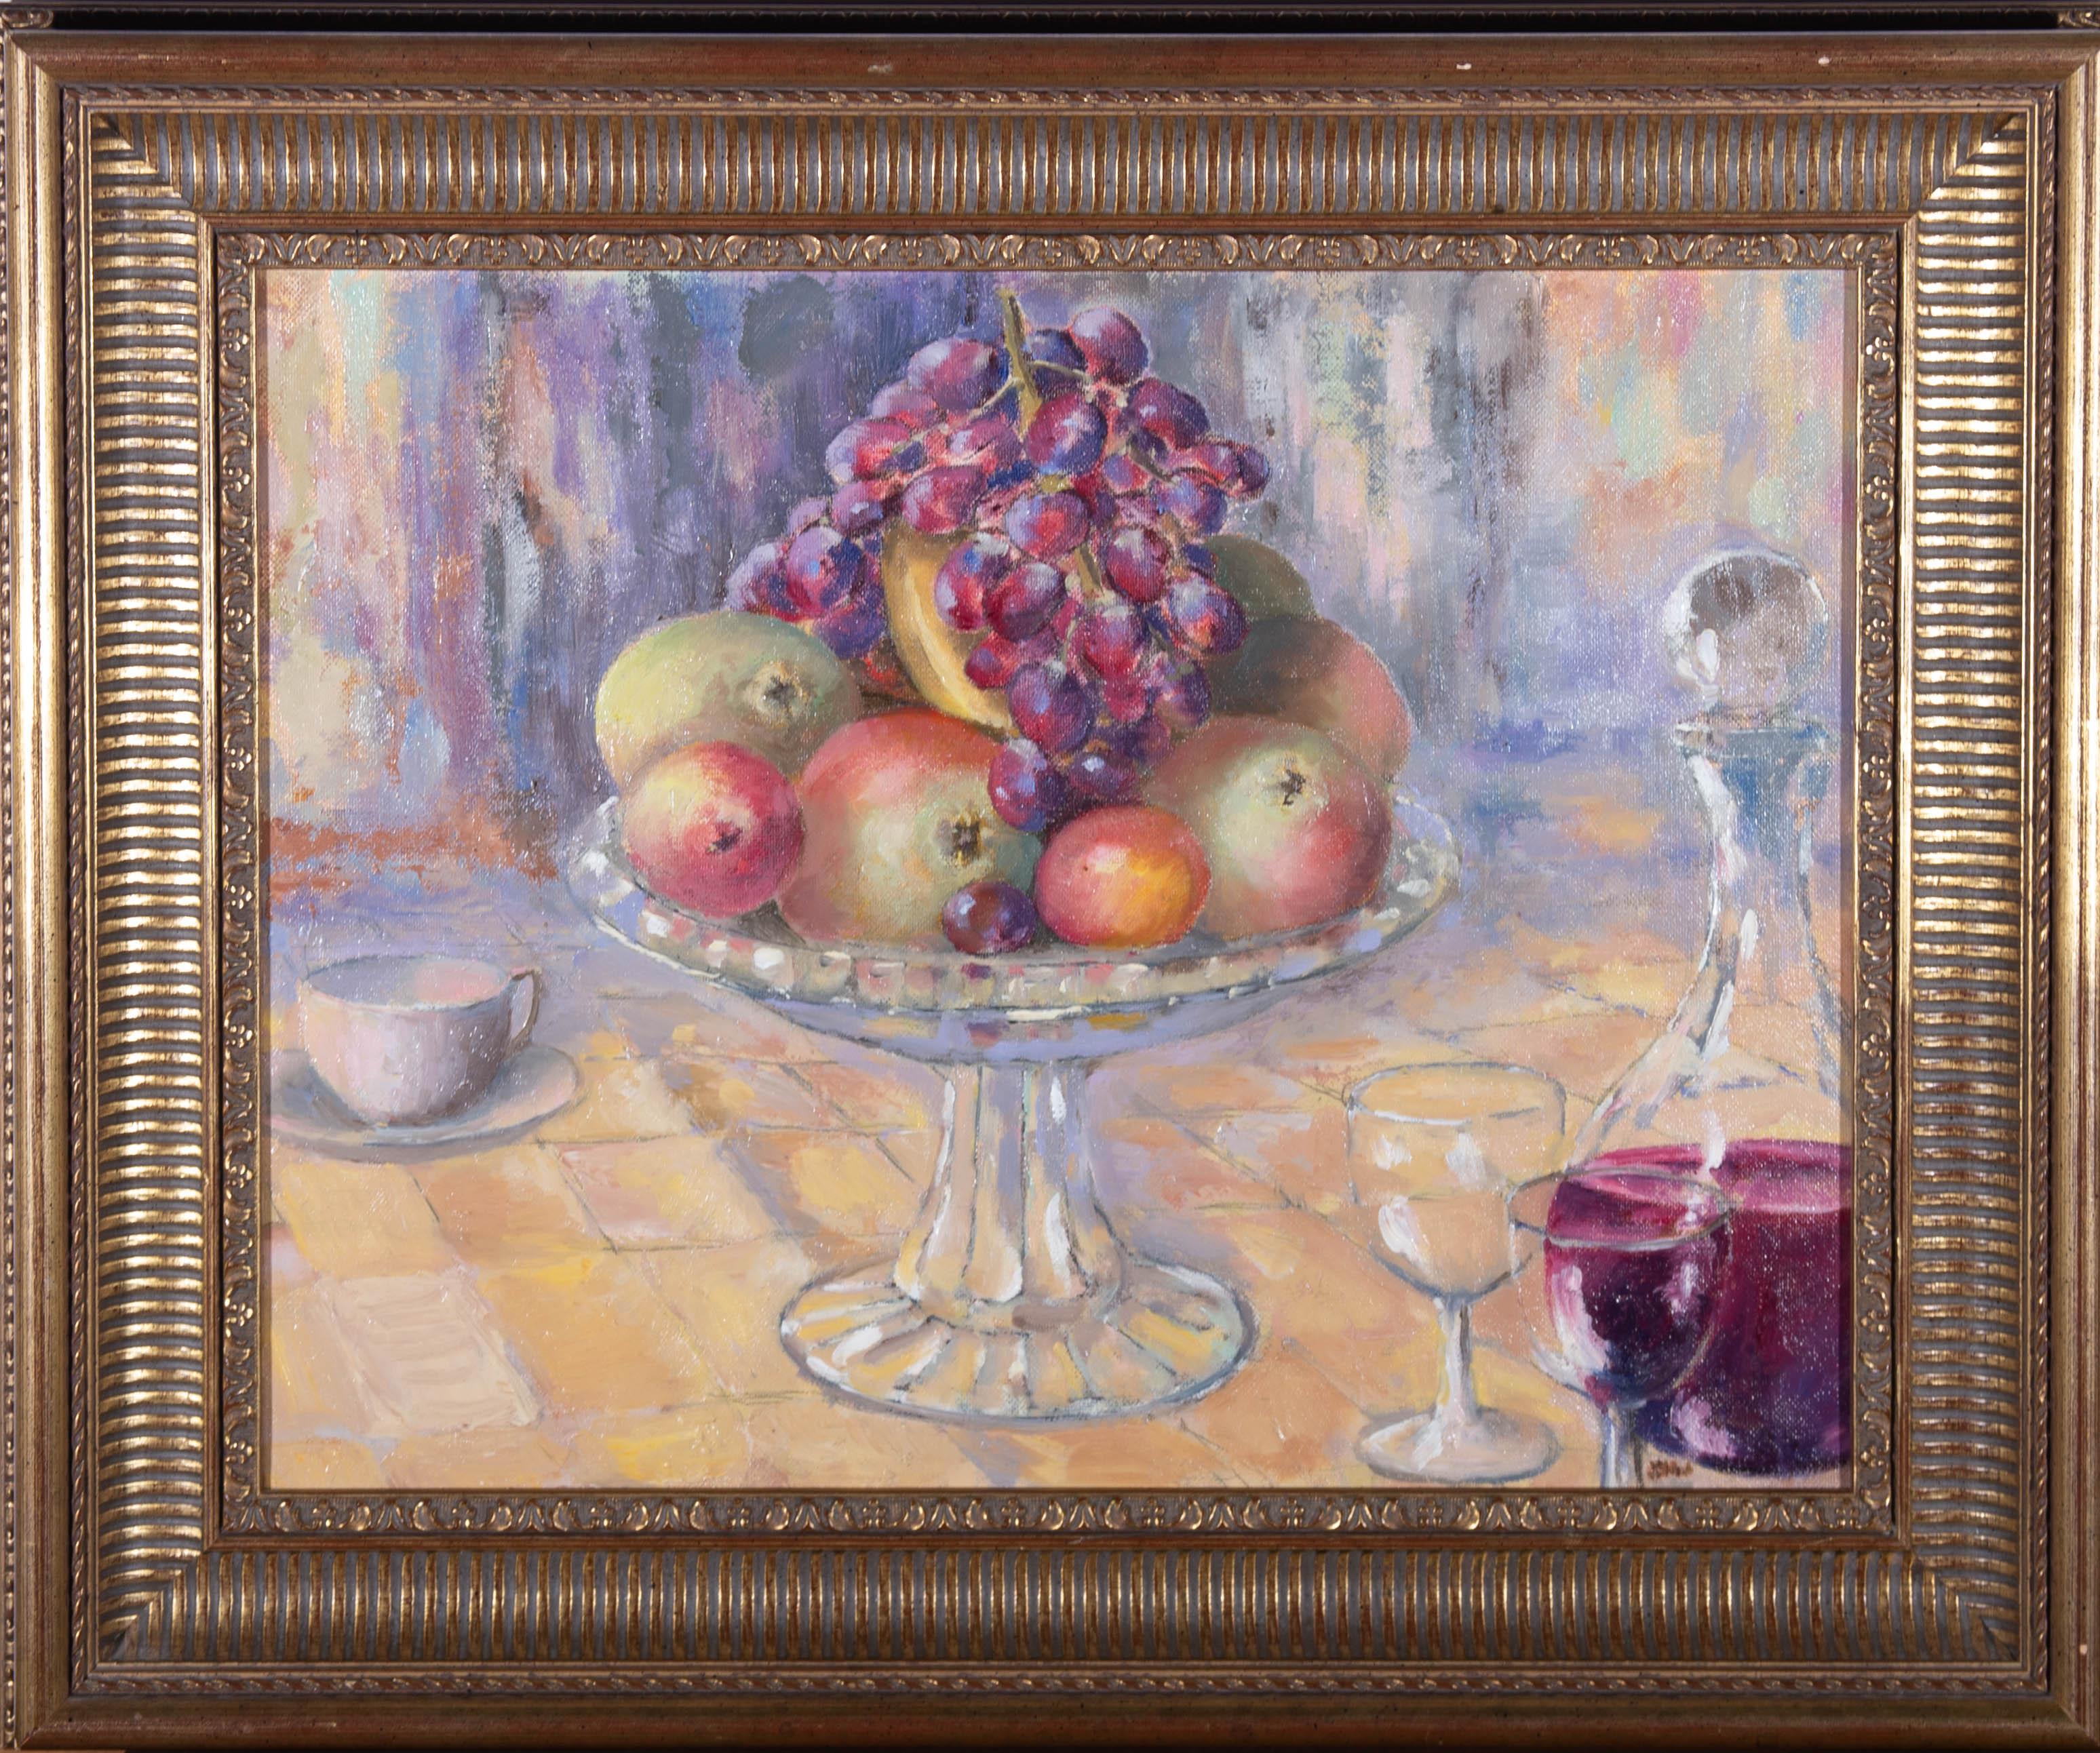 A delightful still life study of a fruit dish and decanter, the artist has used a variety of colours to create a contrast between the fruit and its surroundings and has used flecks of white paint to give the impression of glass and its reflection.